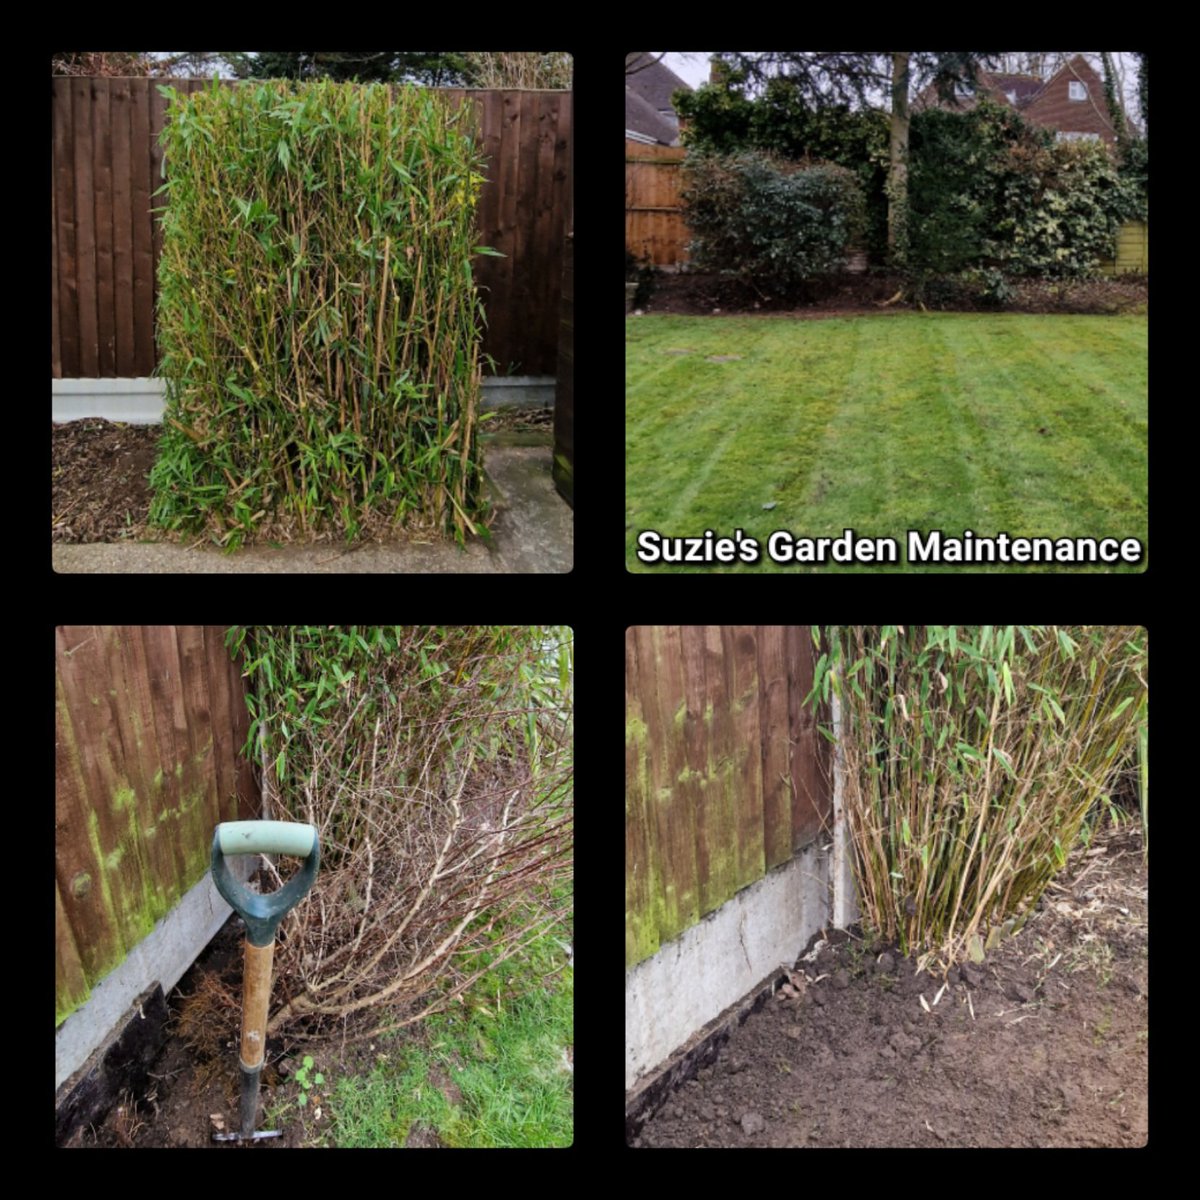 🌱 #Weeding #Wednesday 
🌍 #Thurrock #Grays #ChadwellStMary #Orsett #Stifford_Clays #Essex

❄️ #Winter #Gardening
🌺 #Digging #Hoeing #Flowerbeds
🗞 #LitterPicking
🌿 #ShrubRemoval
 🧹#Cleaning #Pathways #Driveways
🌾 #Grass_Cut #Mowing #Strimming #Lawns
♻️ #Recycling #Greenwaste